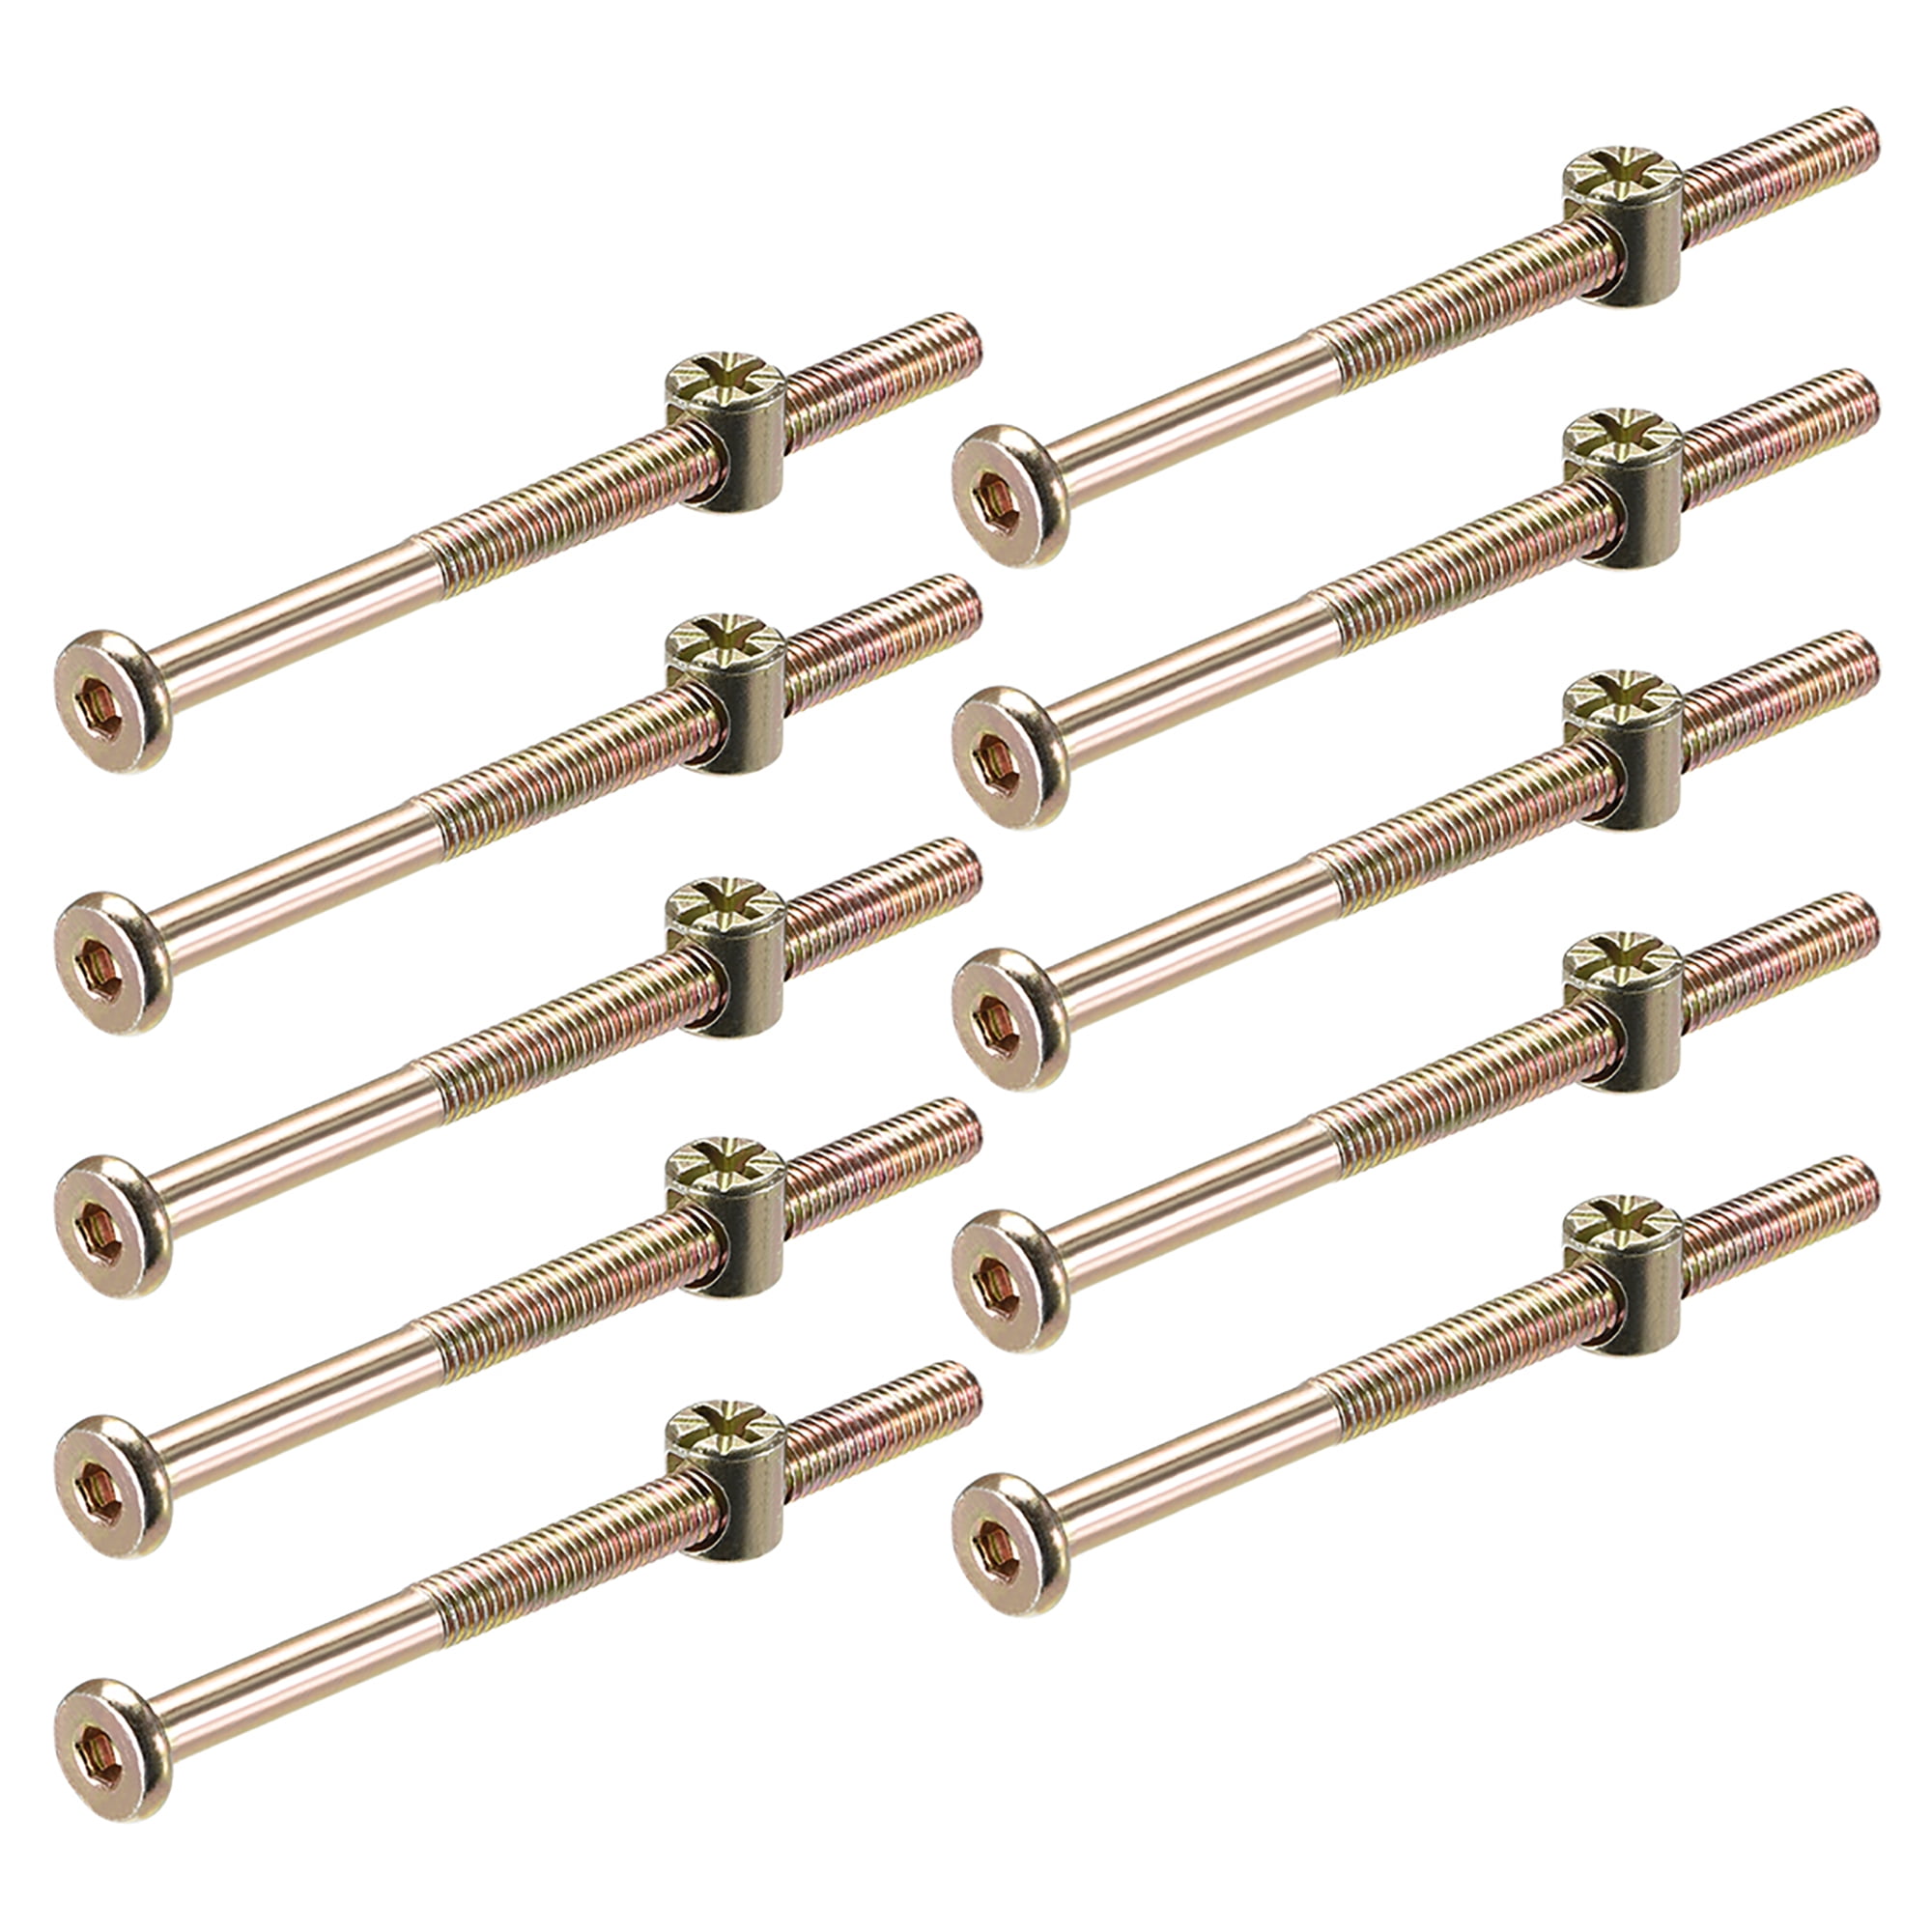 Details about   M6 FURNITURE CONNECTOR BOLTS  JOINT CONNECTOR  BOLTS ALLEN KEY HEAD 10mm-80mm 